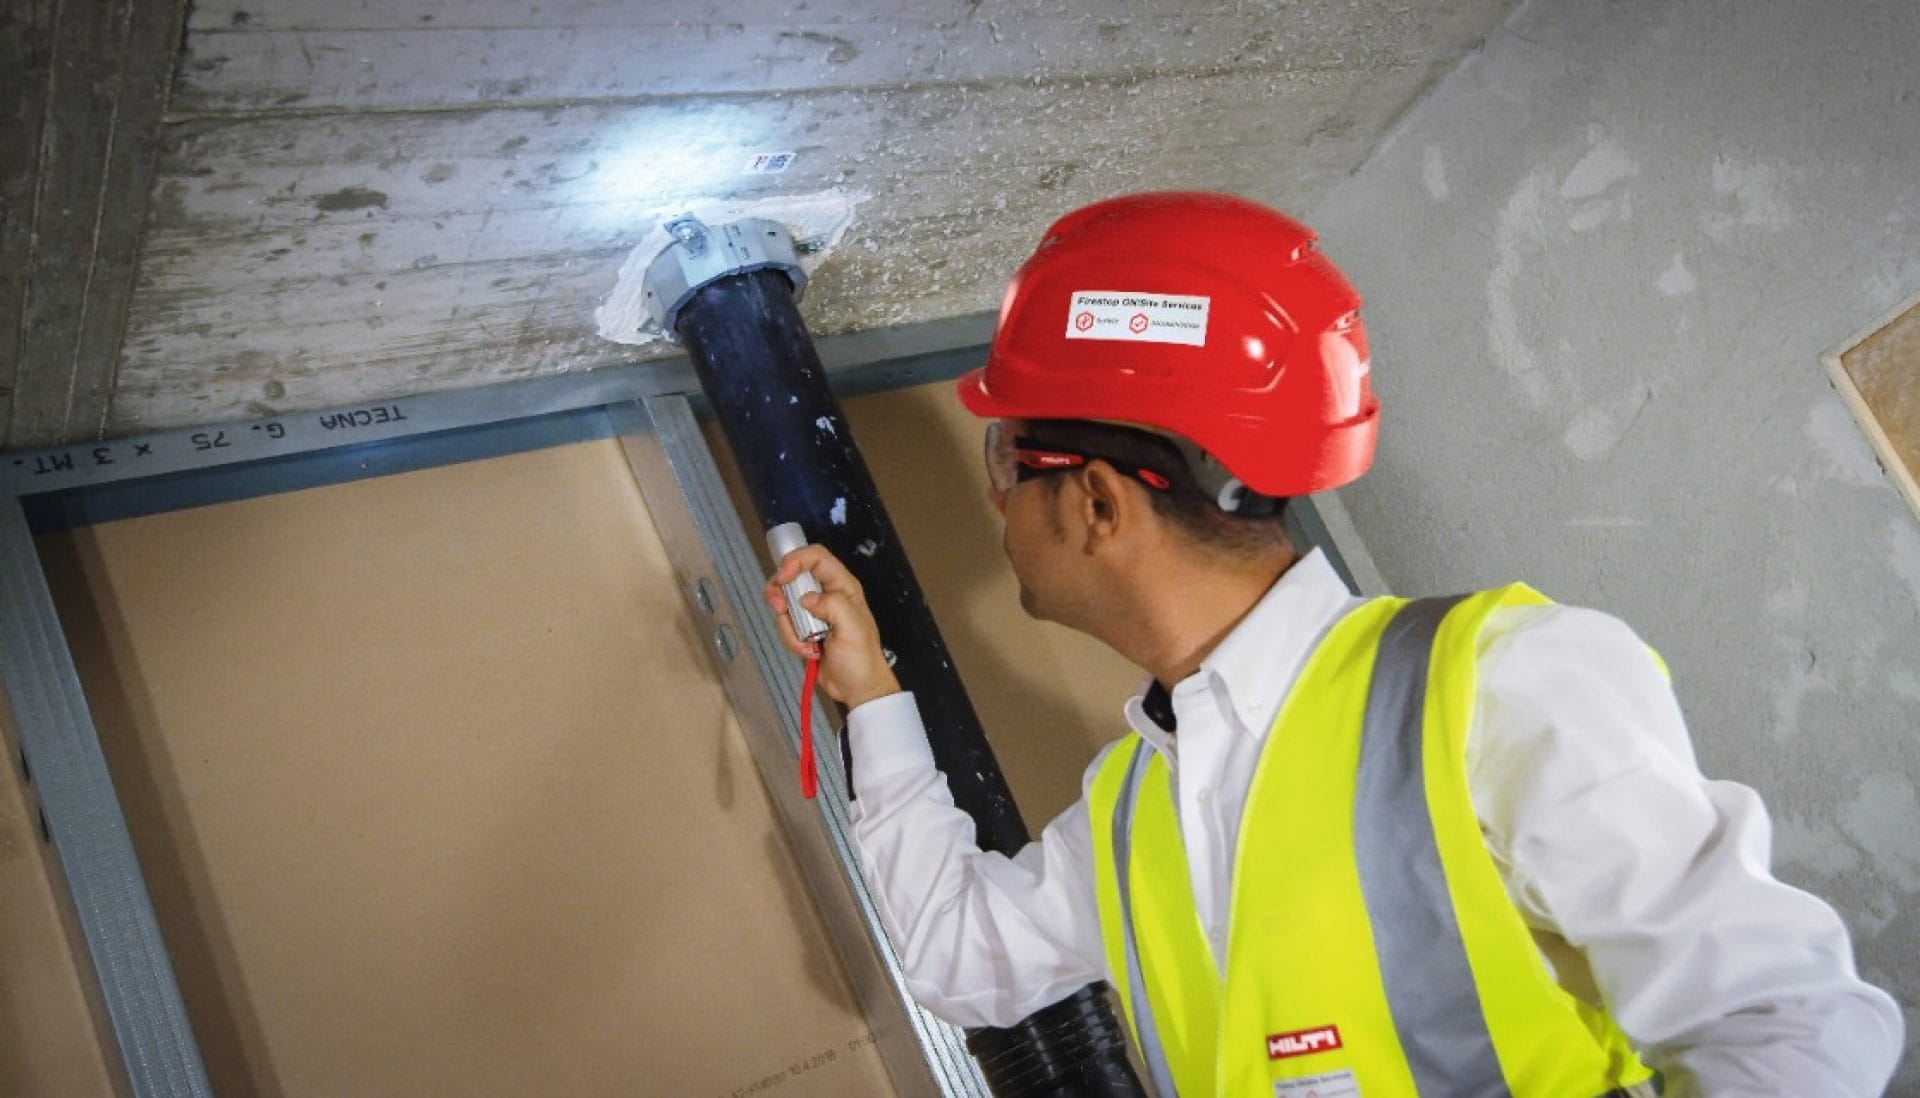 Onsite documentation vouches for quality installation prior to inspection